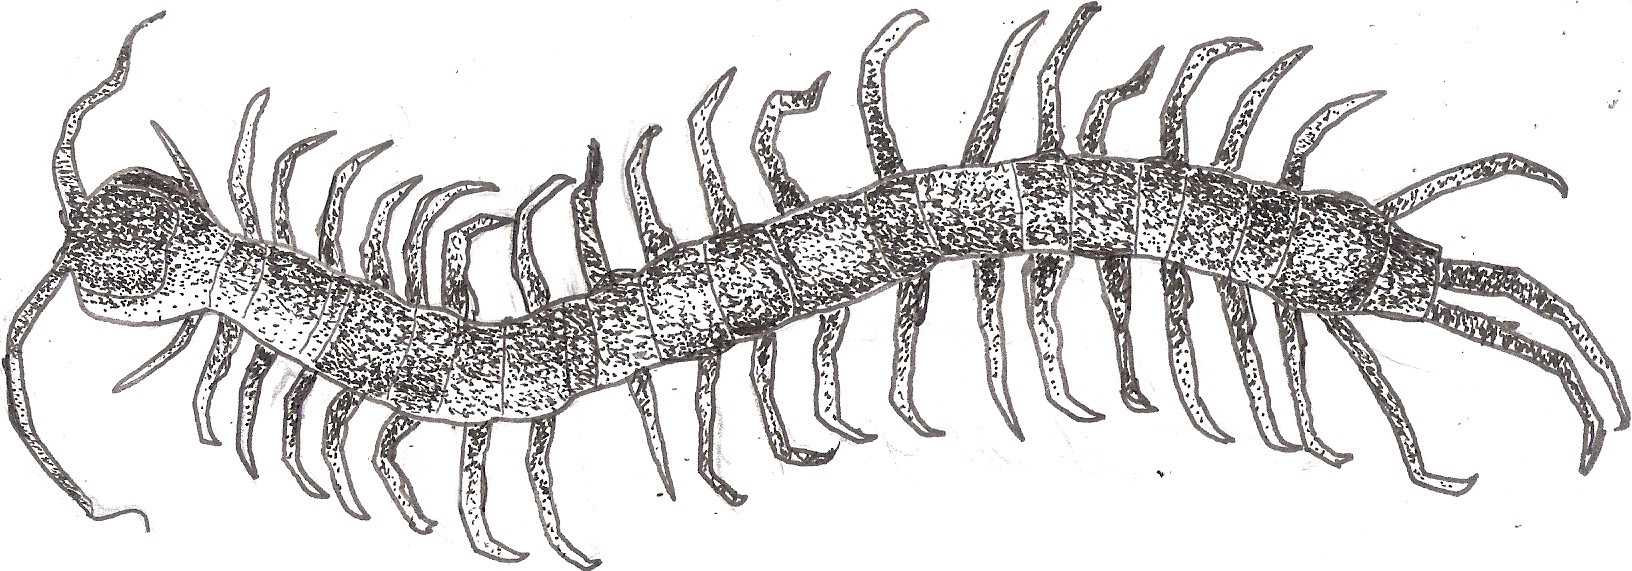 [Image: scolopendra_subspinipes_by_personinator-d7yp4d2.jpg]